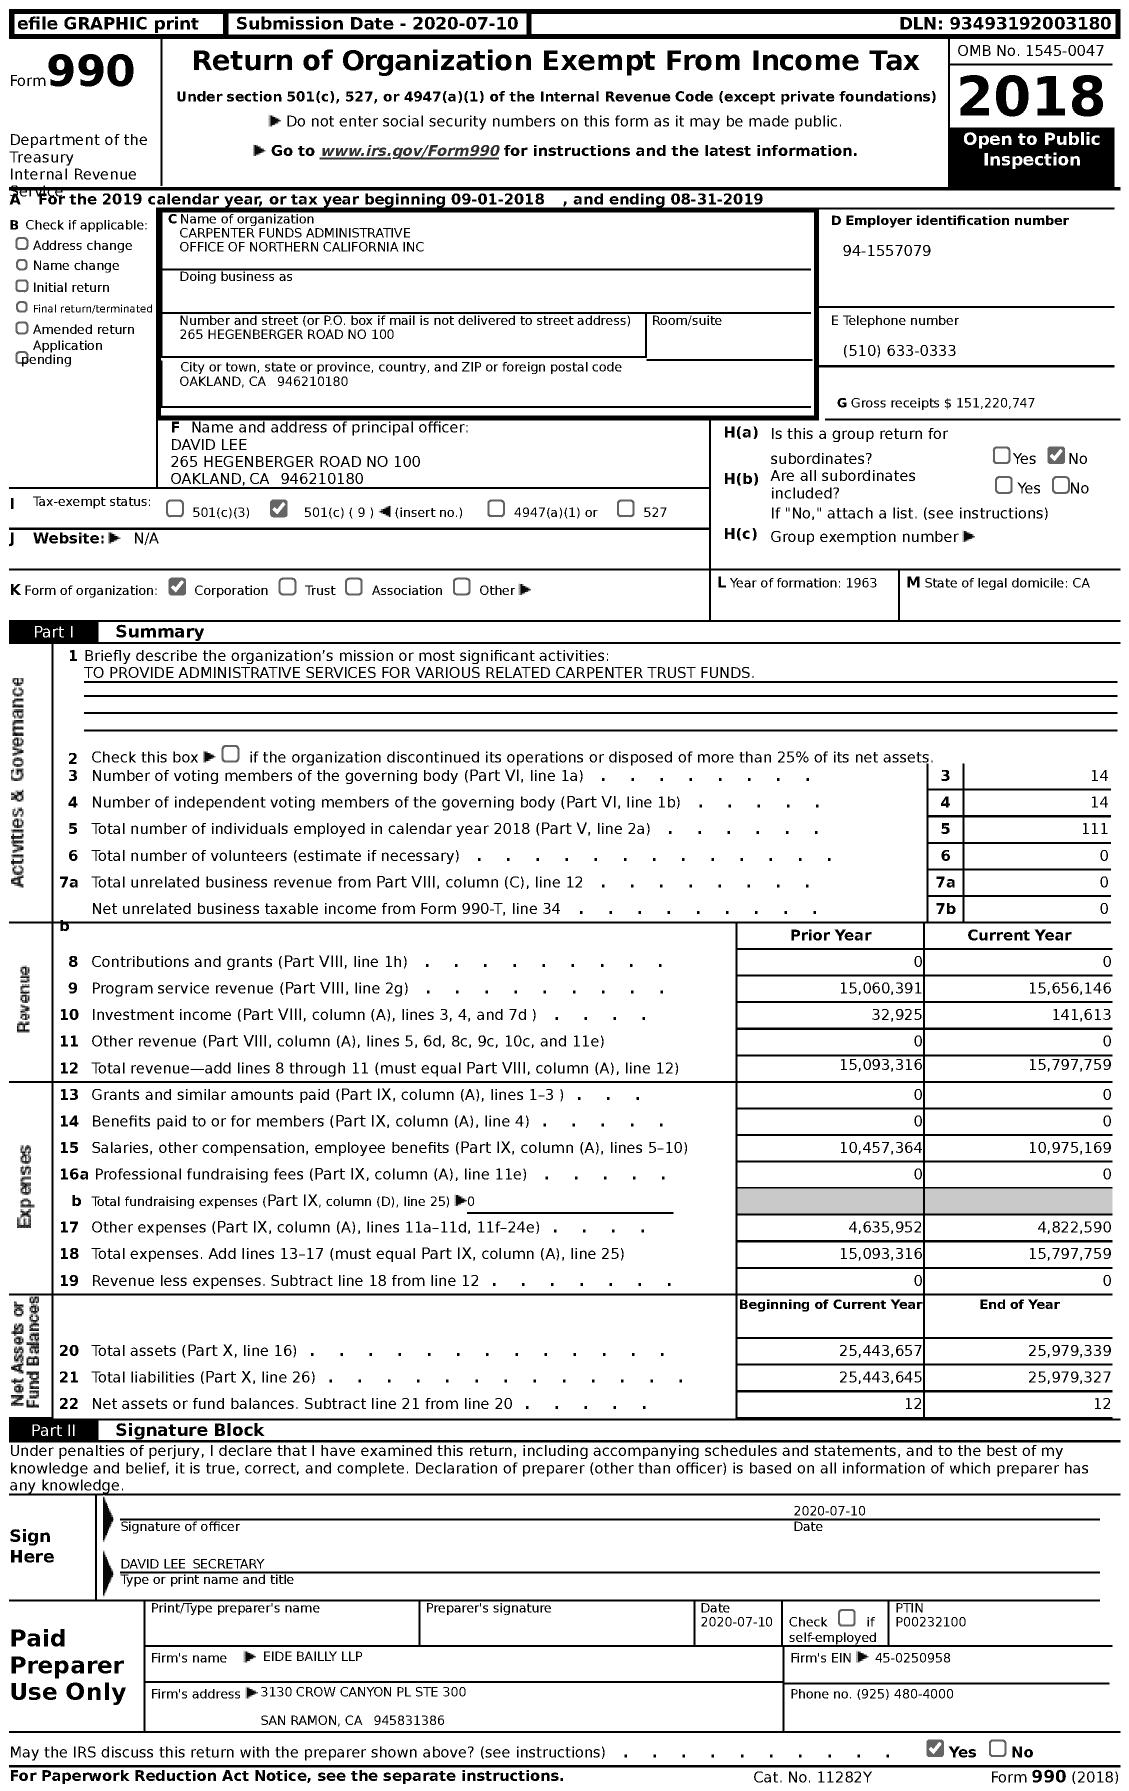 Image of first page of 2018 Form 990 for Carpenters Funds Administrative Office of Northern California